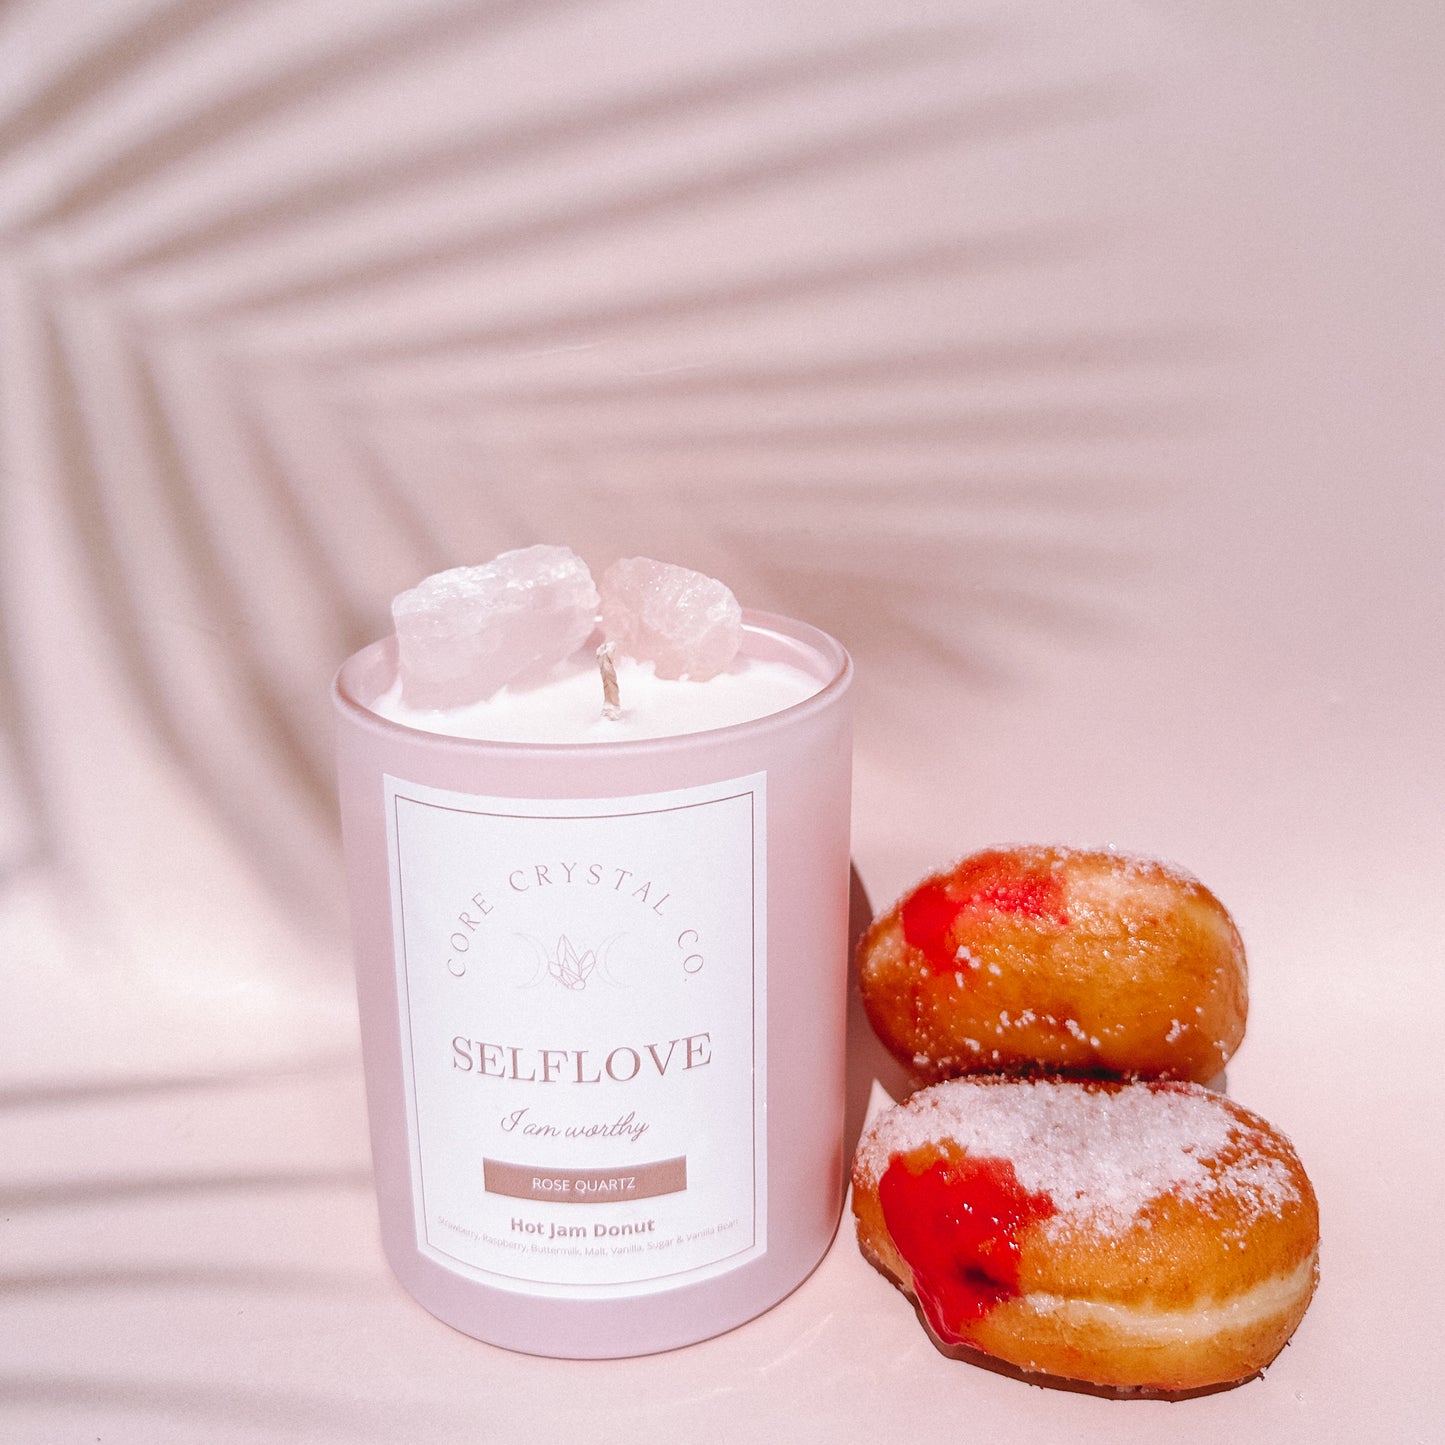 SELFLOVE Hot Jam Donut Crystal Infused Candle